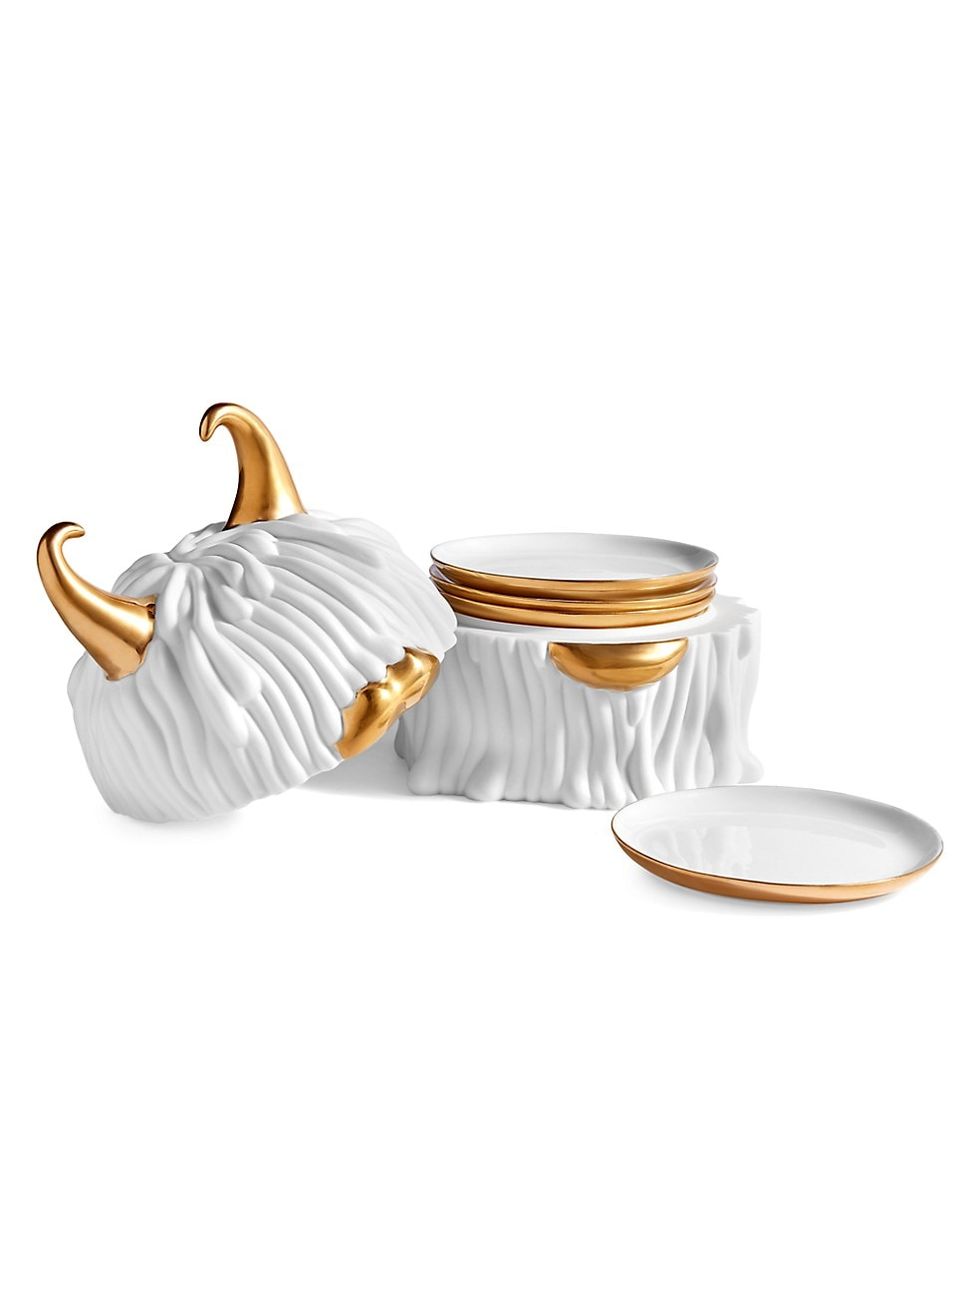 Haas Gold and Porcelain Plate Set